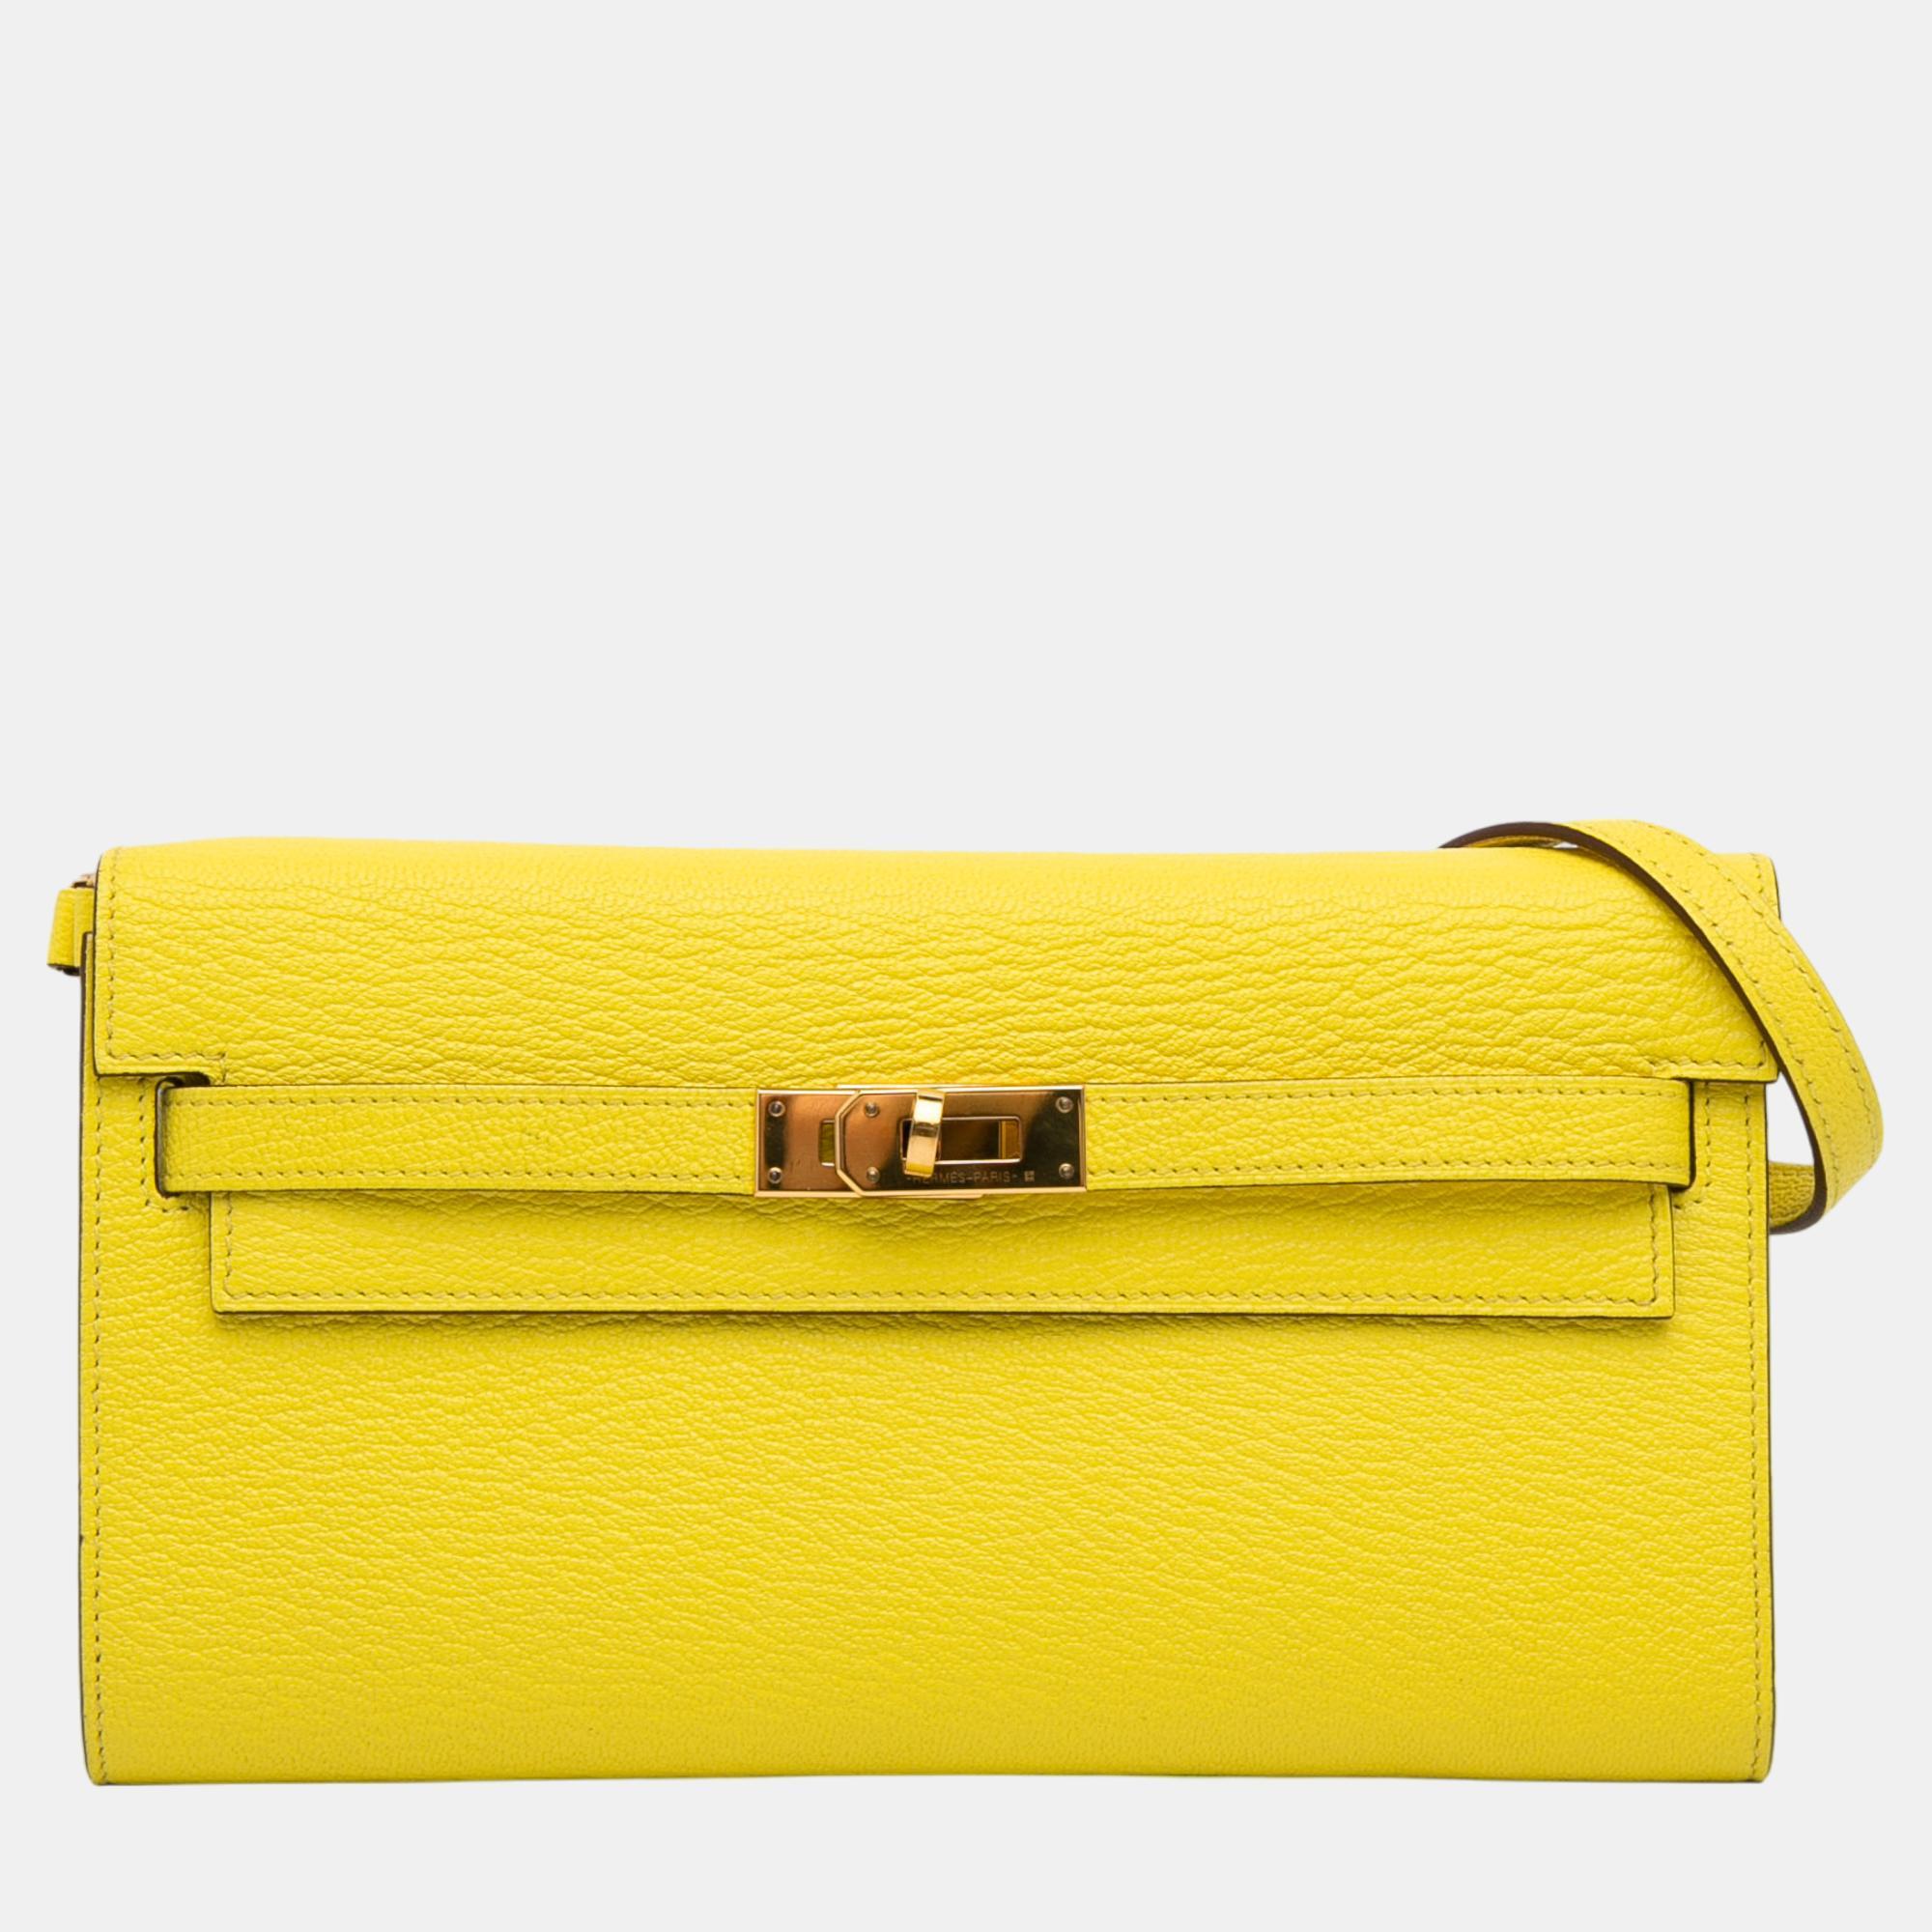 Hermes yellow chevre kelly to go wallet